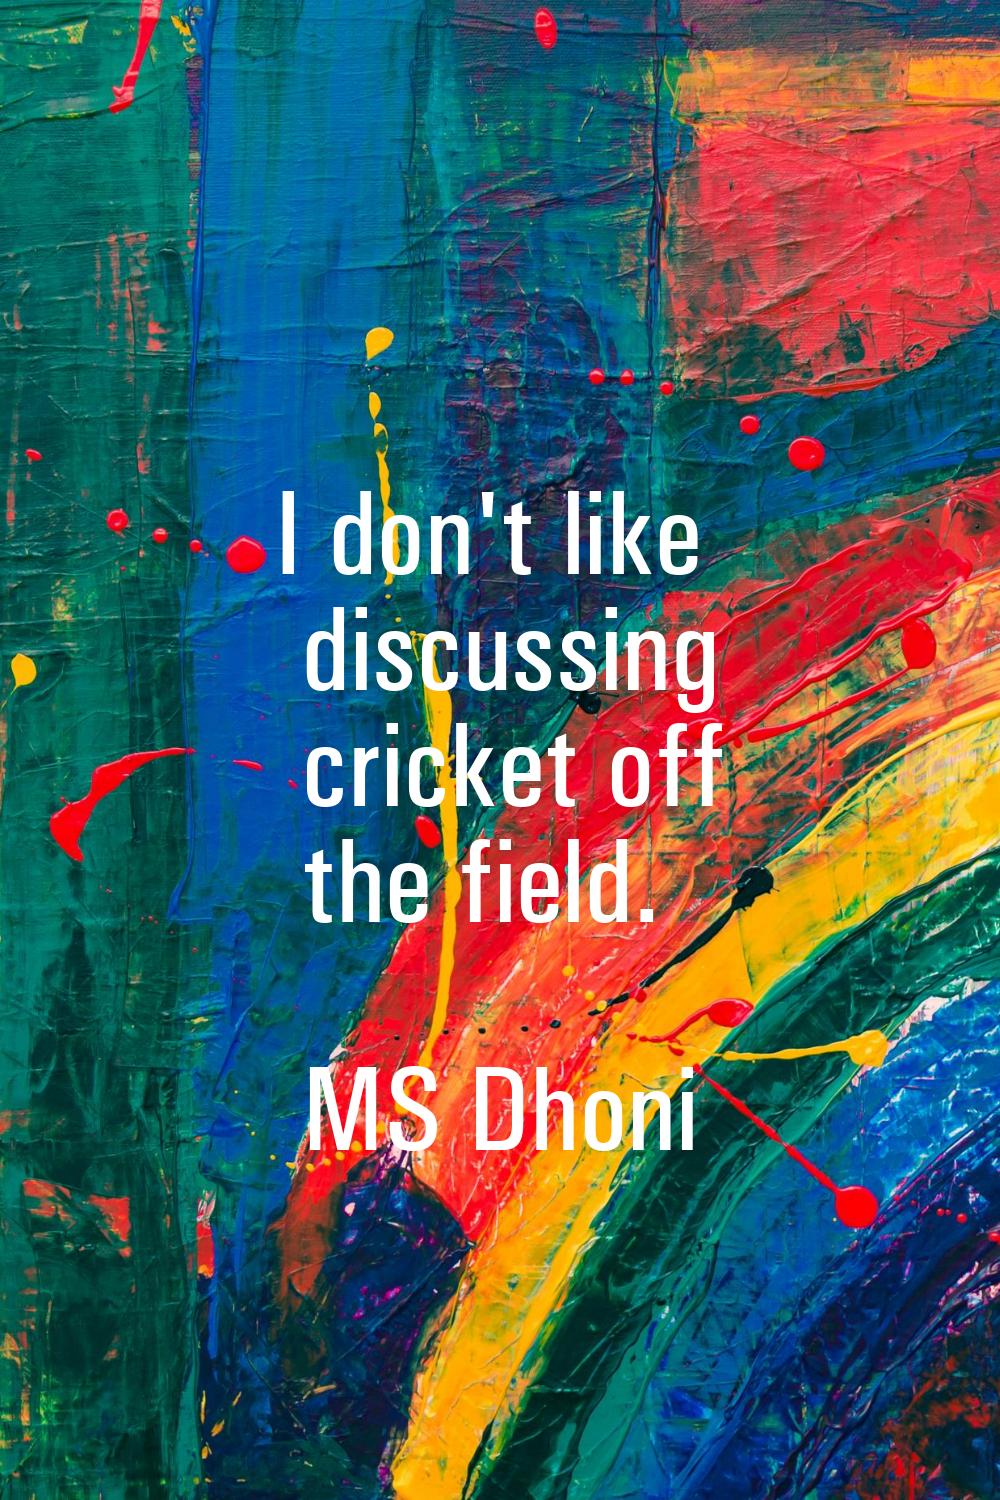 I don't like discussing cricket off the field.